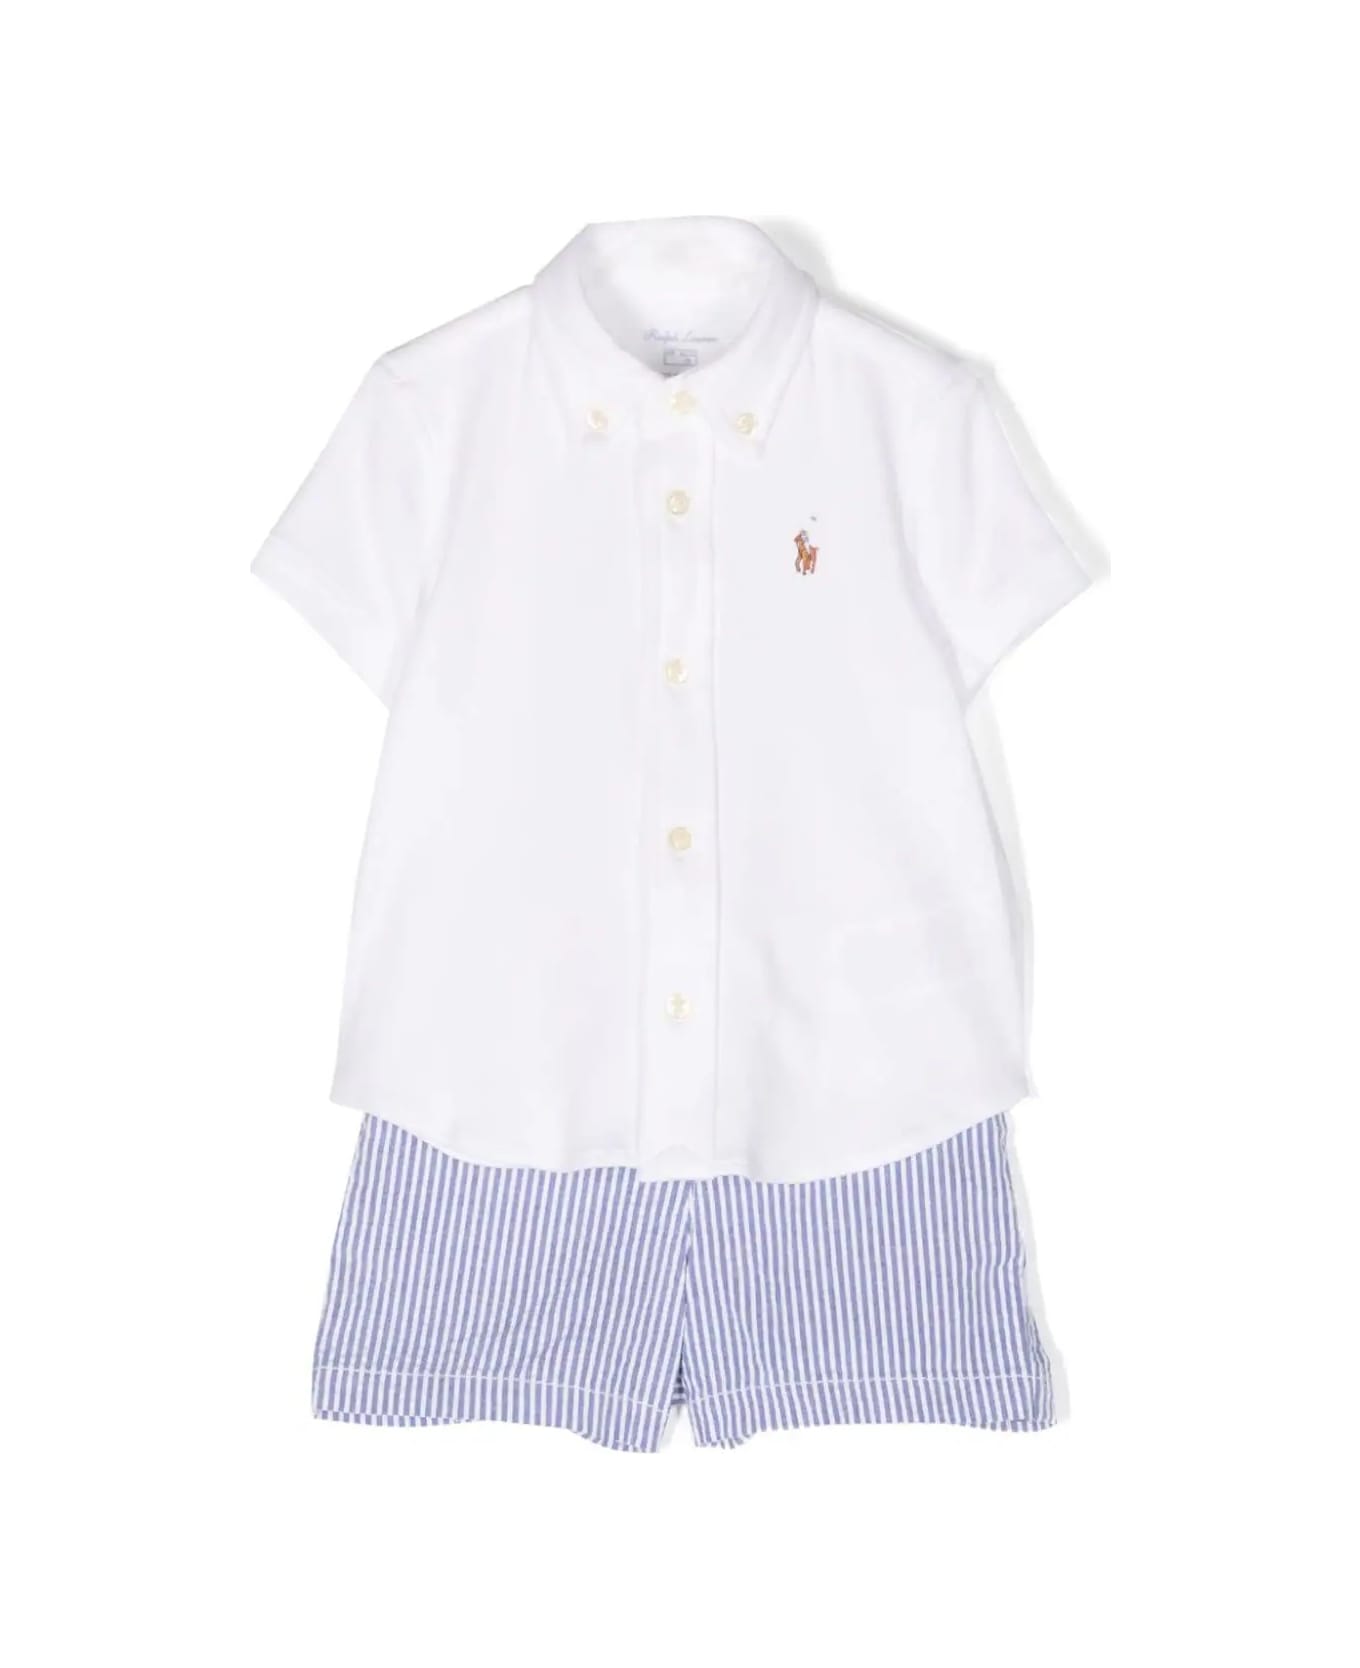 Ralph Lauren White And Light Blue Set With Shirt And Shorts - White